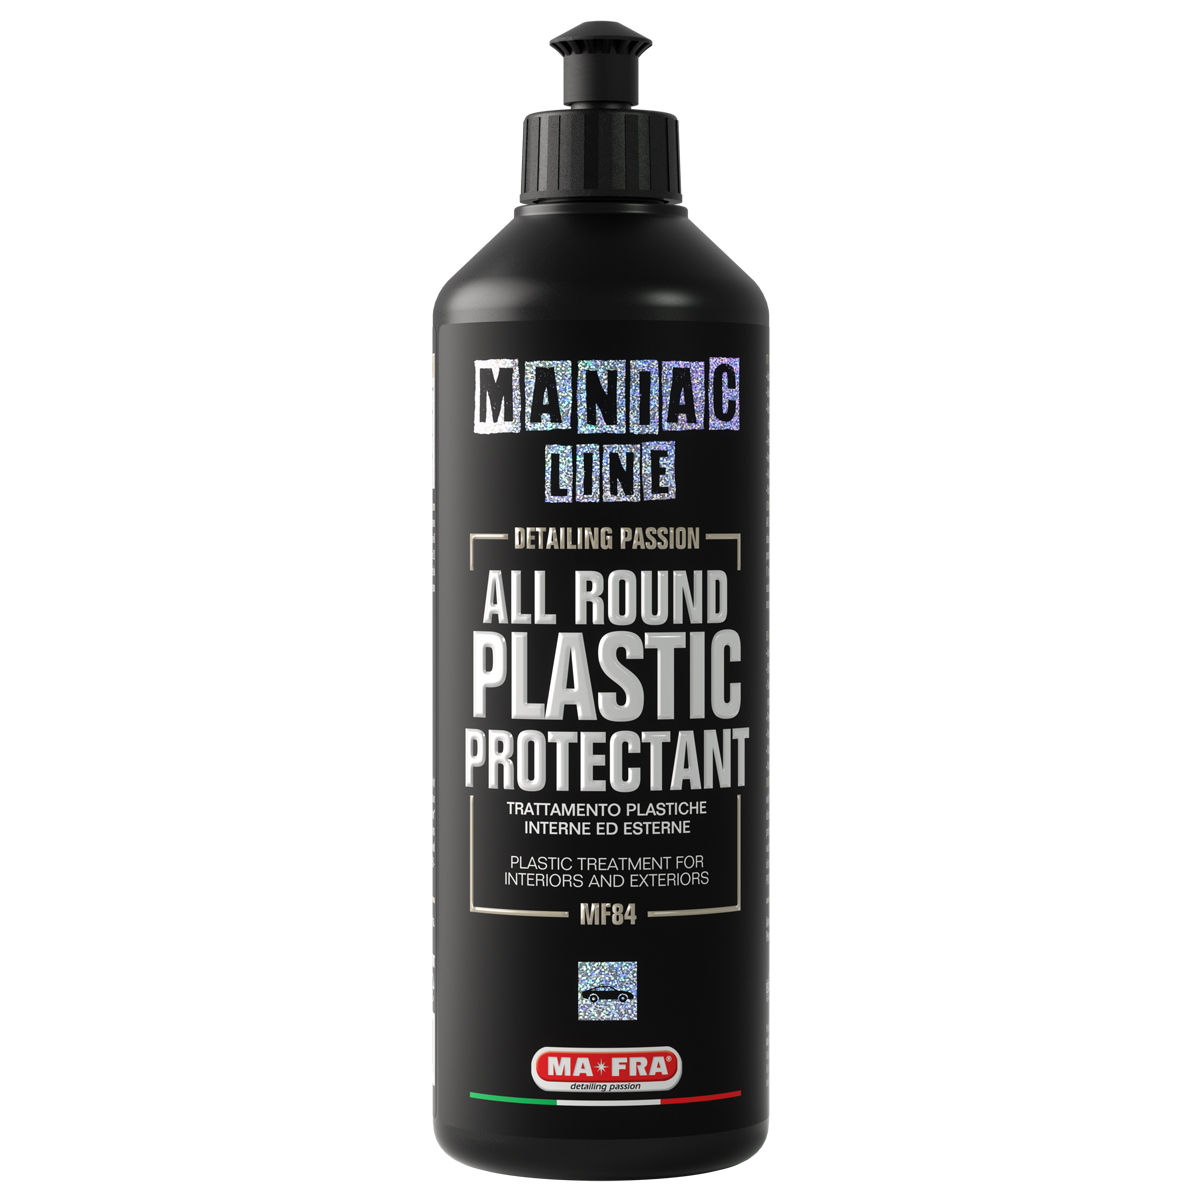 Mafra Maniac Car Detailing Line, All Round Plastic Protectant, Protects and  Revives Plastic and Auto Rubber, Both Internal and External, 500ml